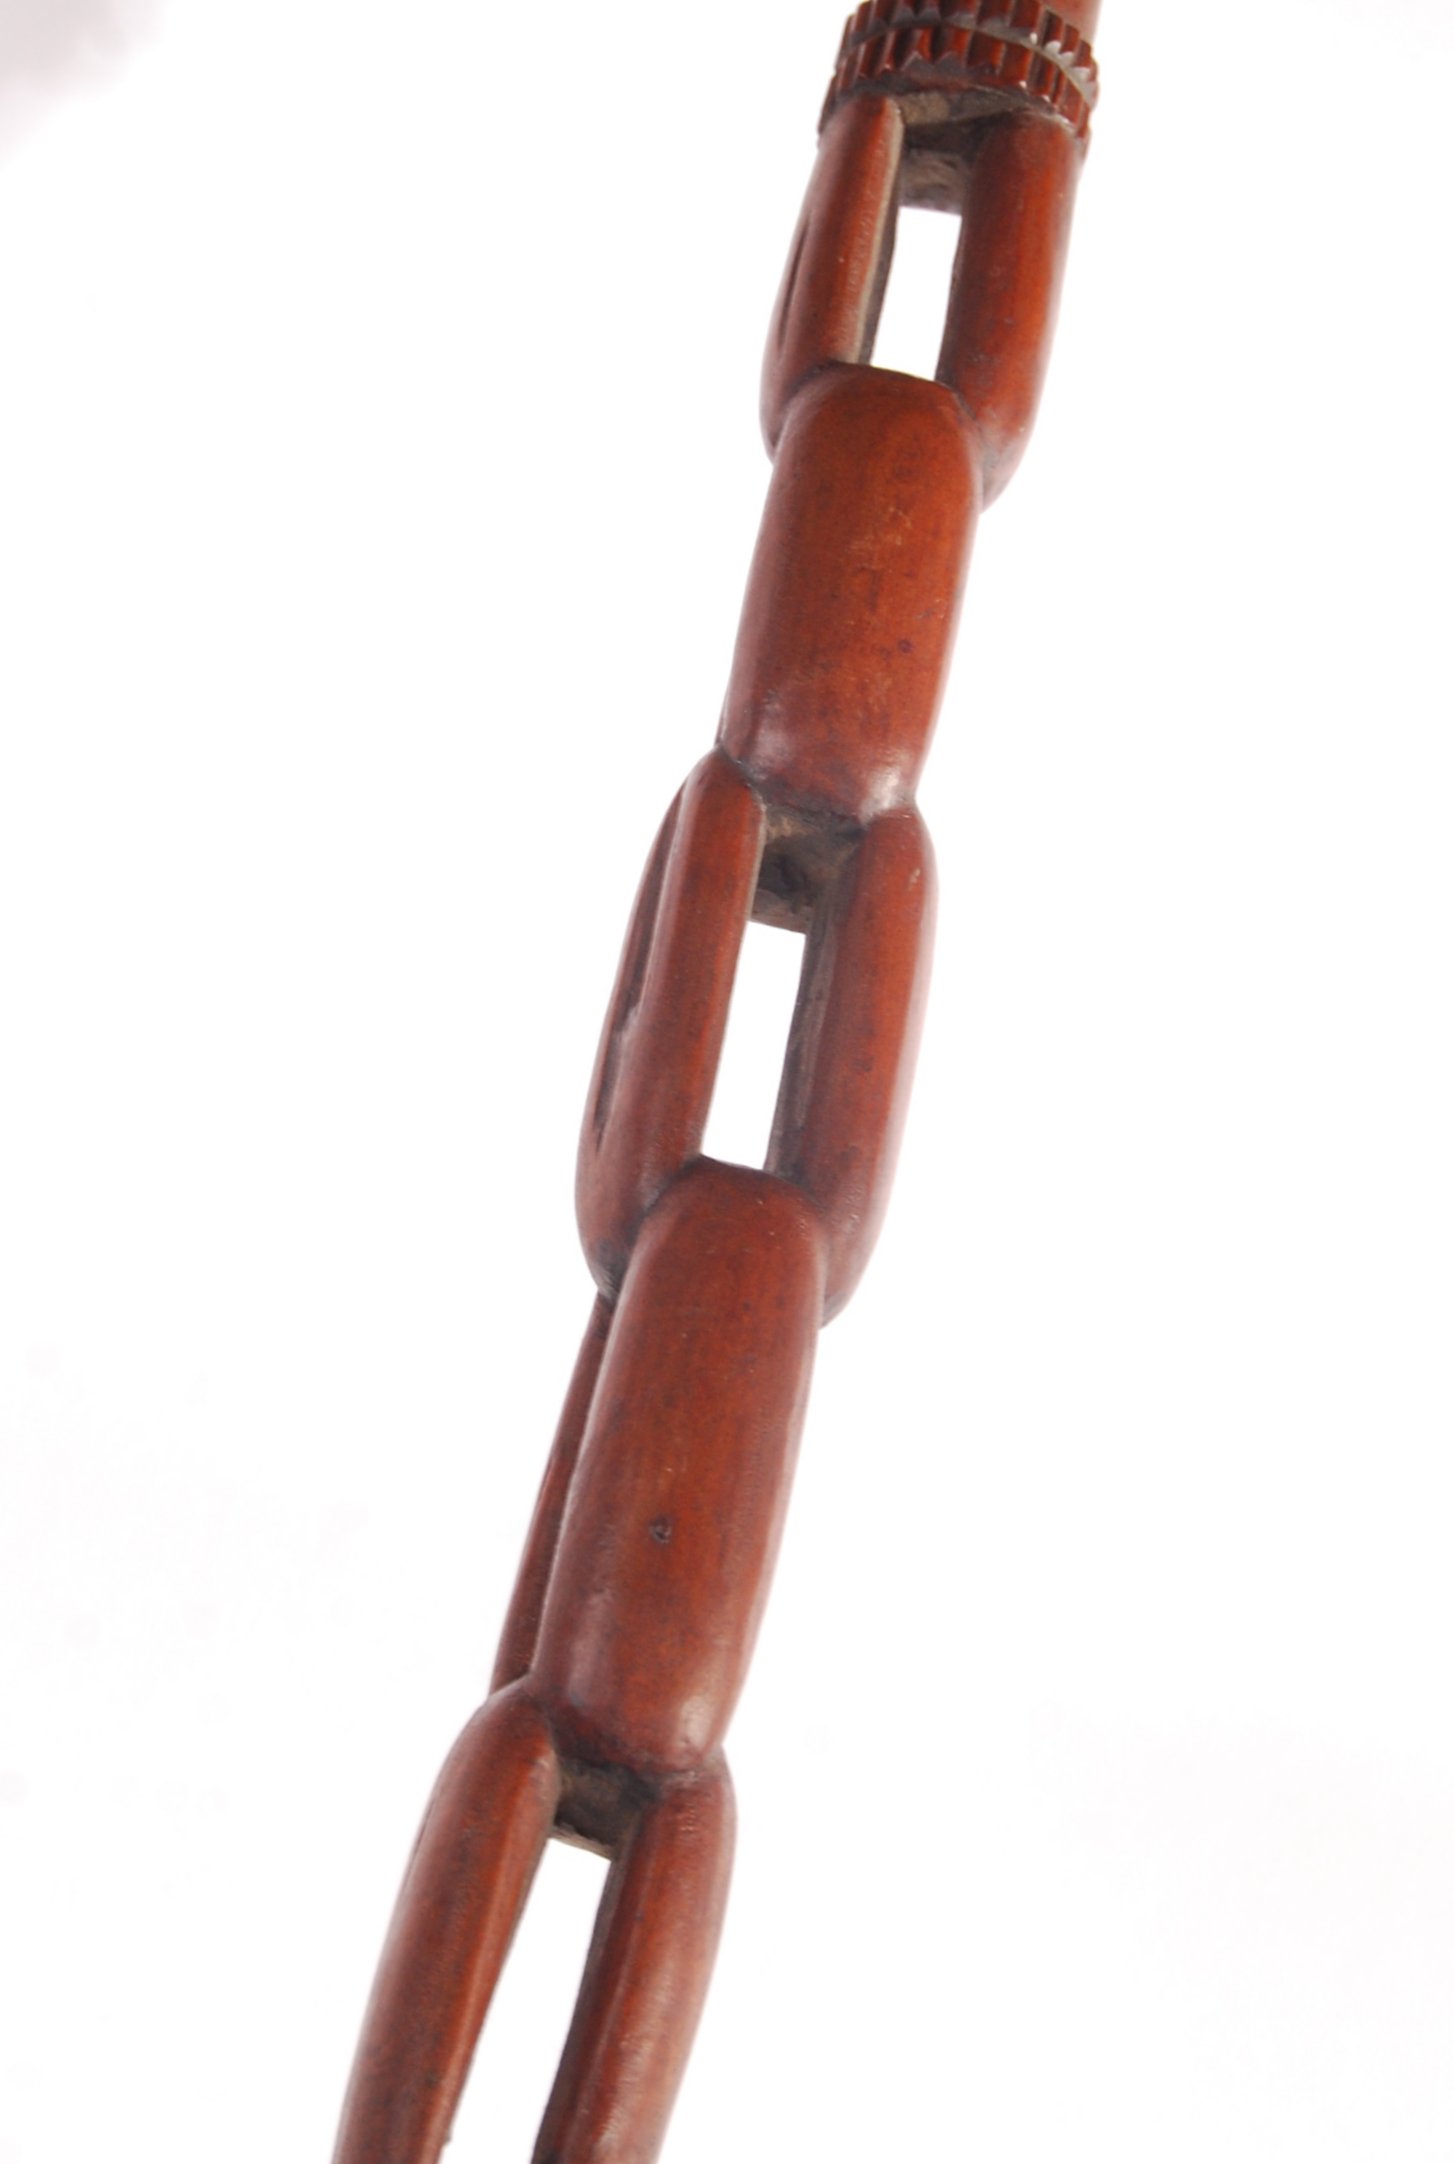 INDONESIAN 20TH CENTURY WOODEN CARVED PADDLE SPEAR - Image 4 of 4